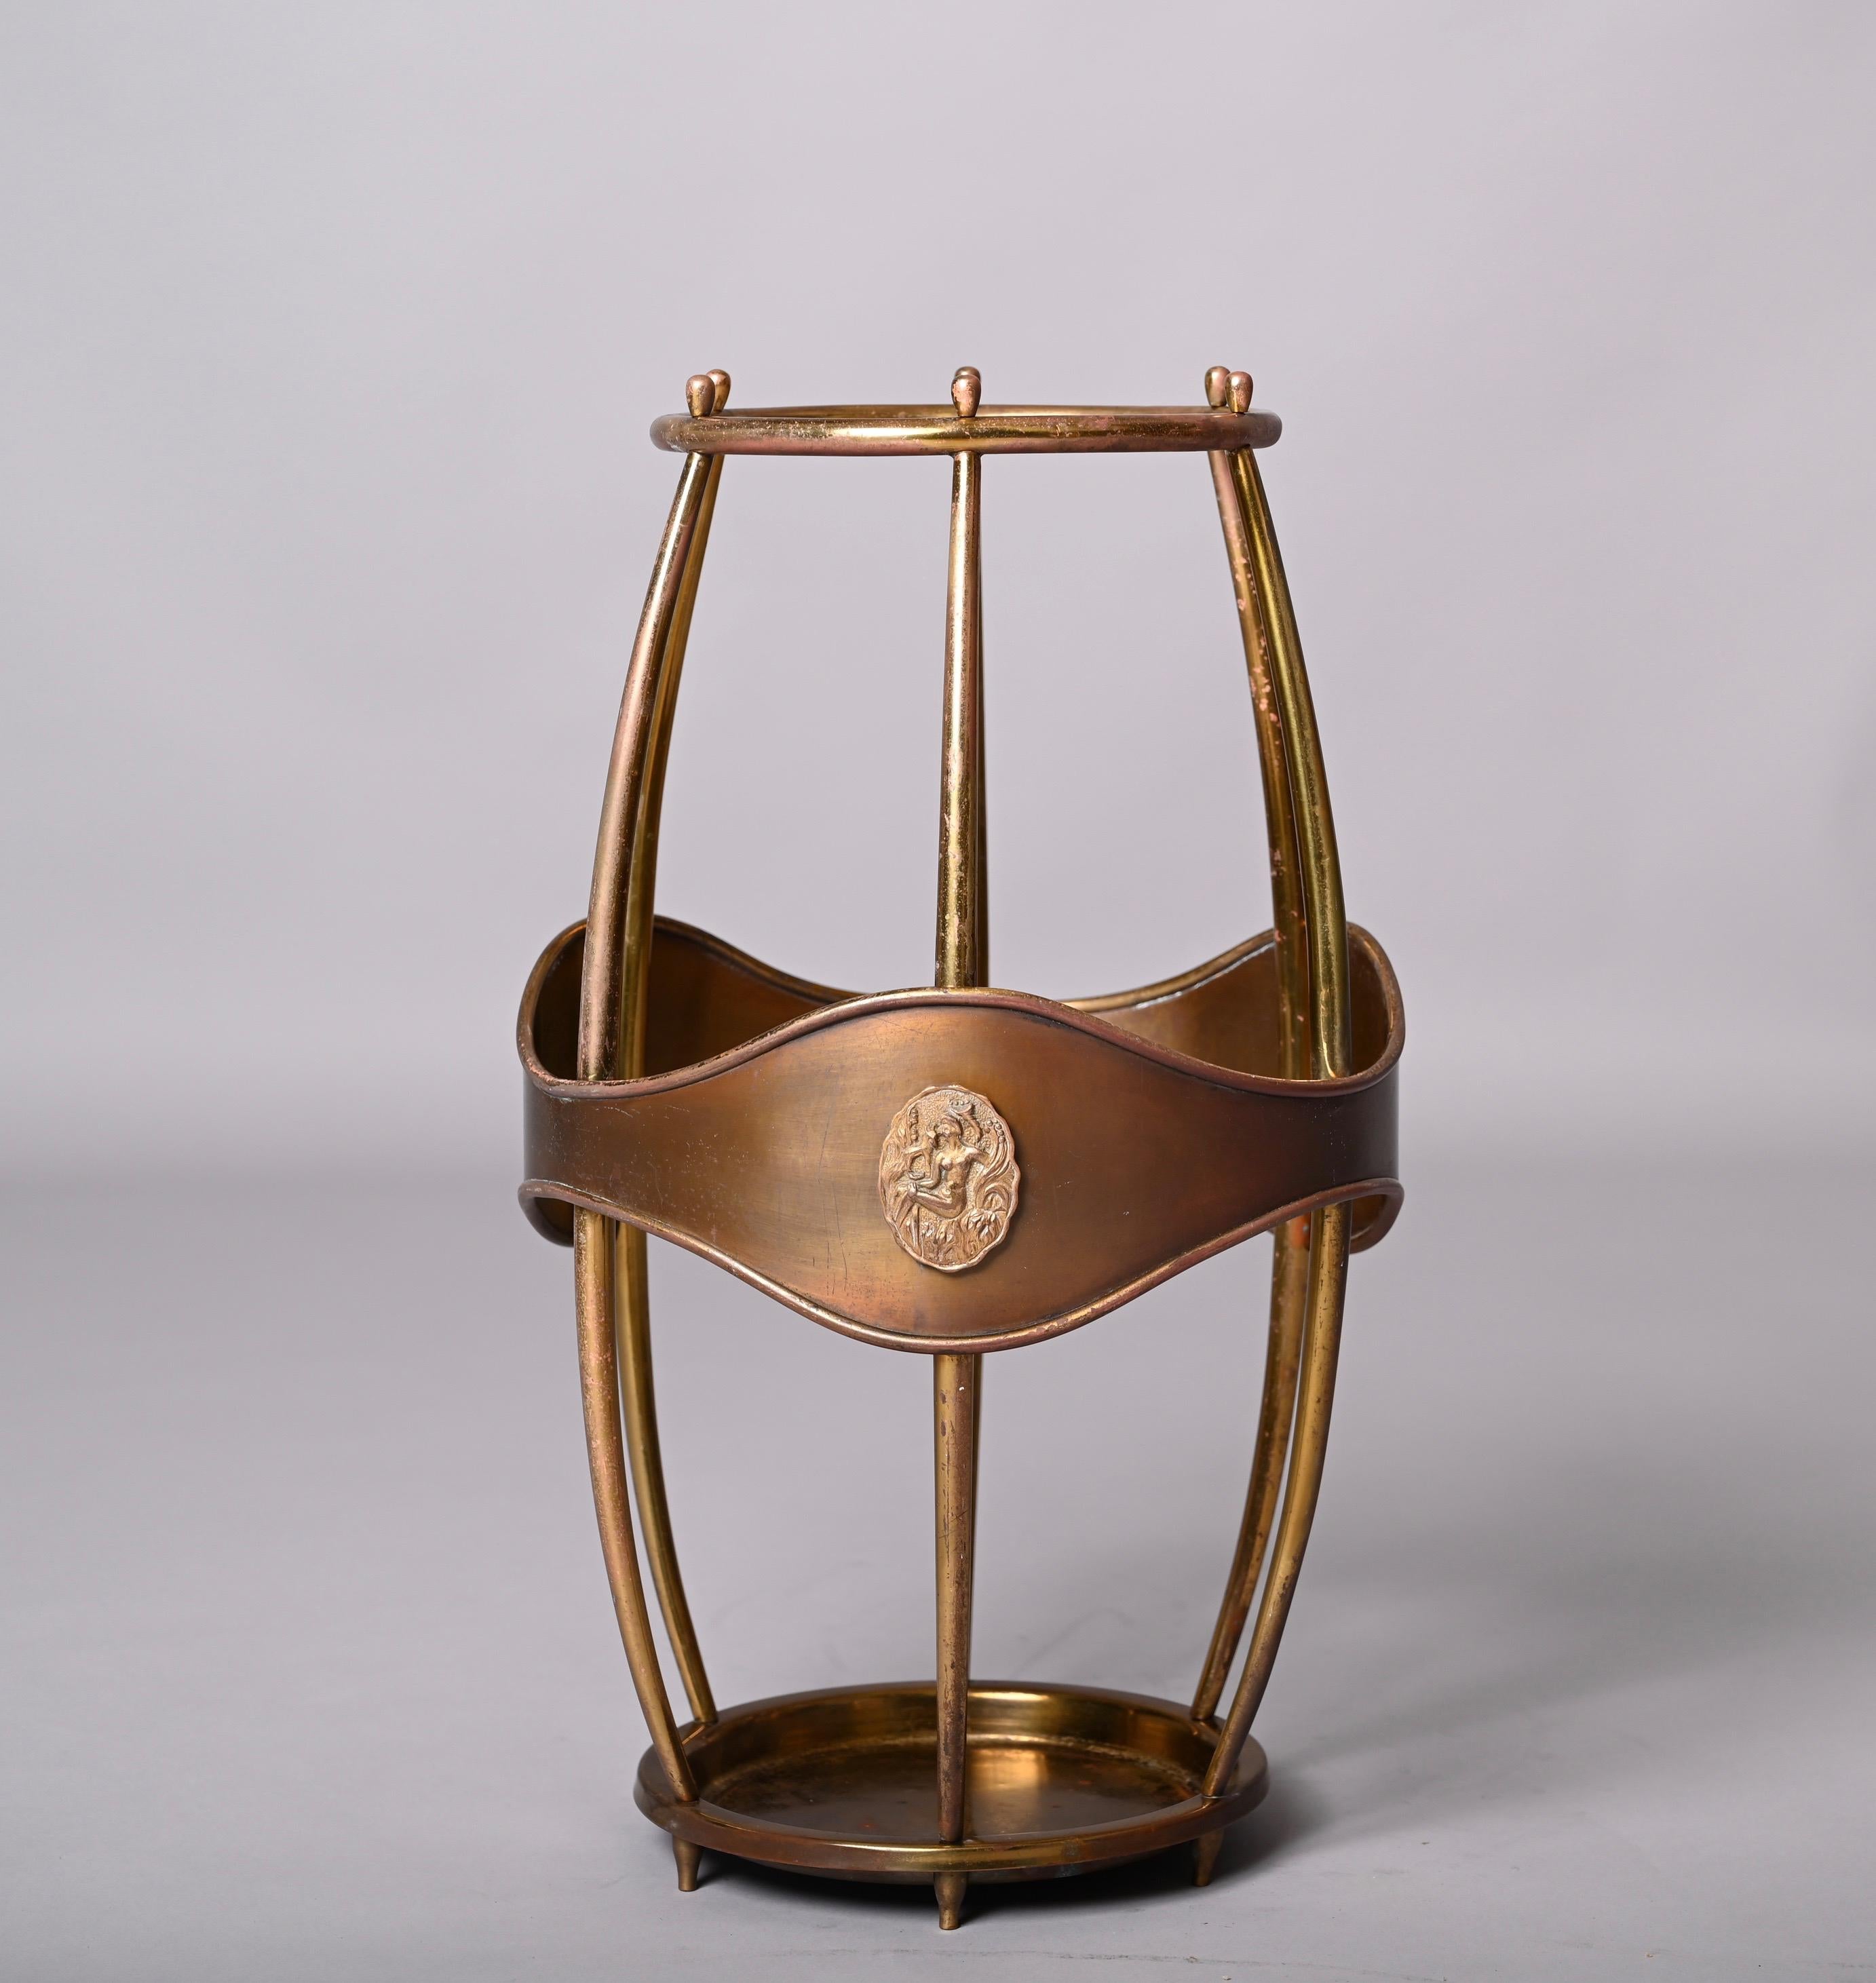 Midcentury Italian Brass Barrell-Shaped Umbrella Stand and Cane Holder, 1950s For Sale 15